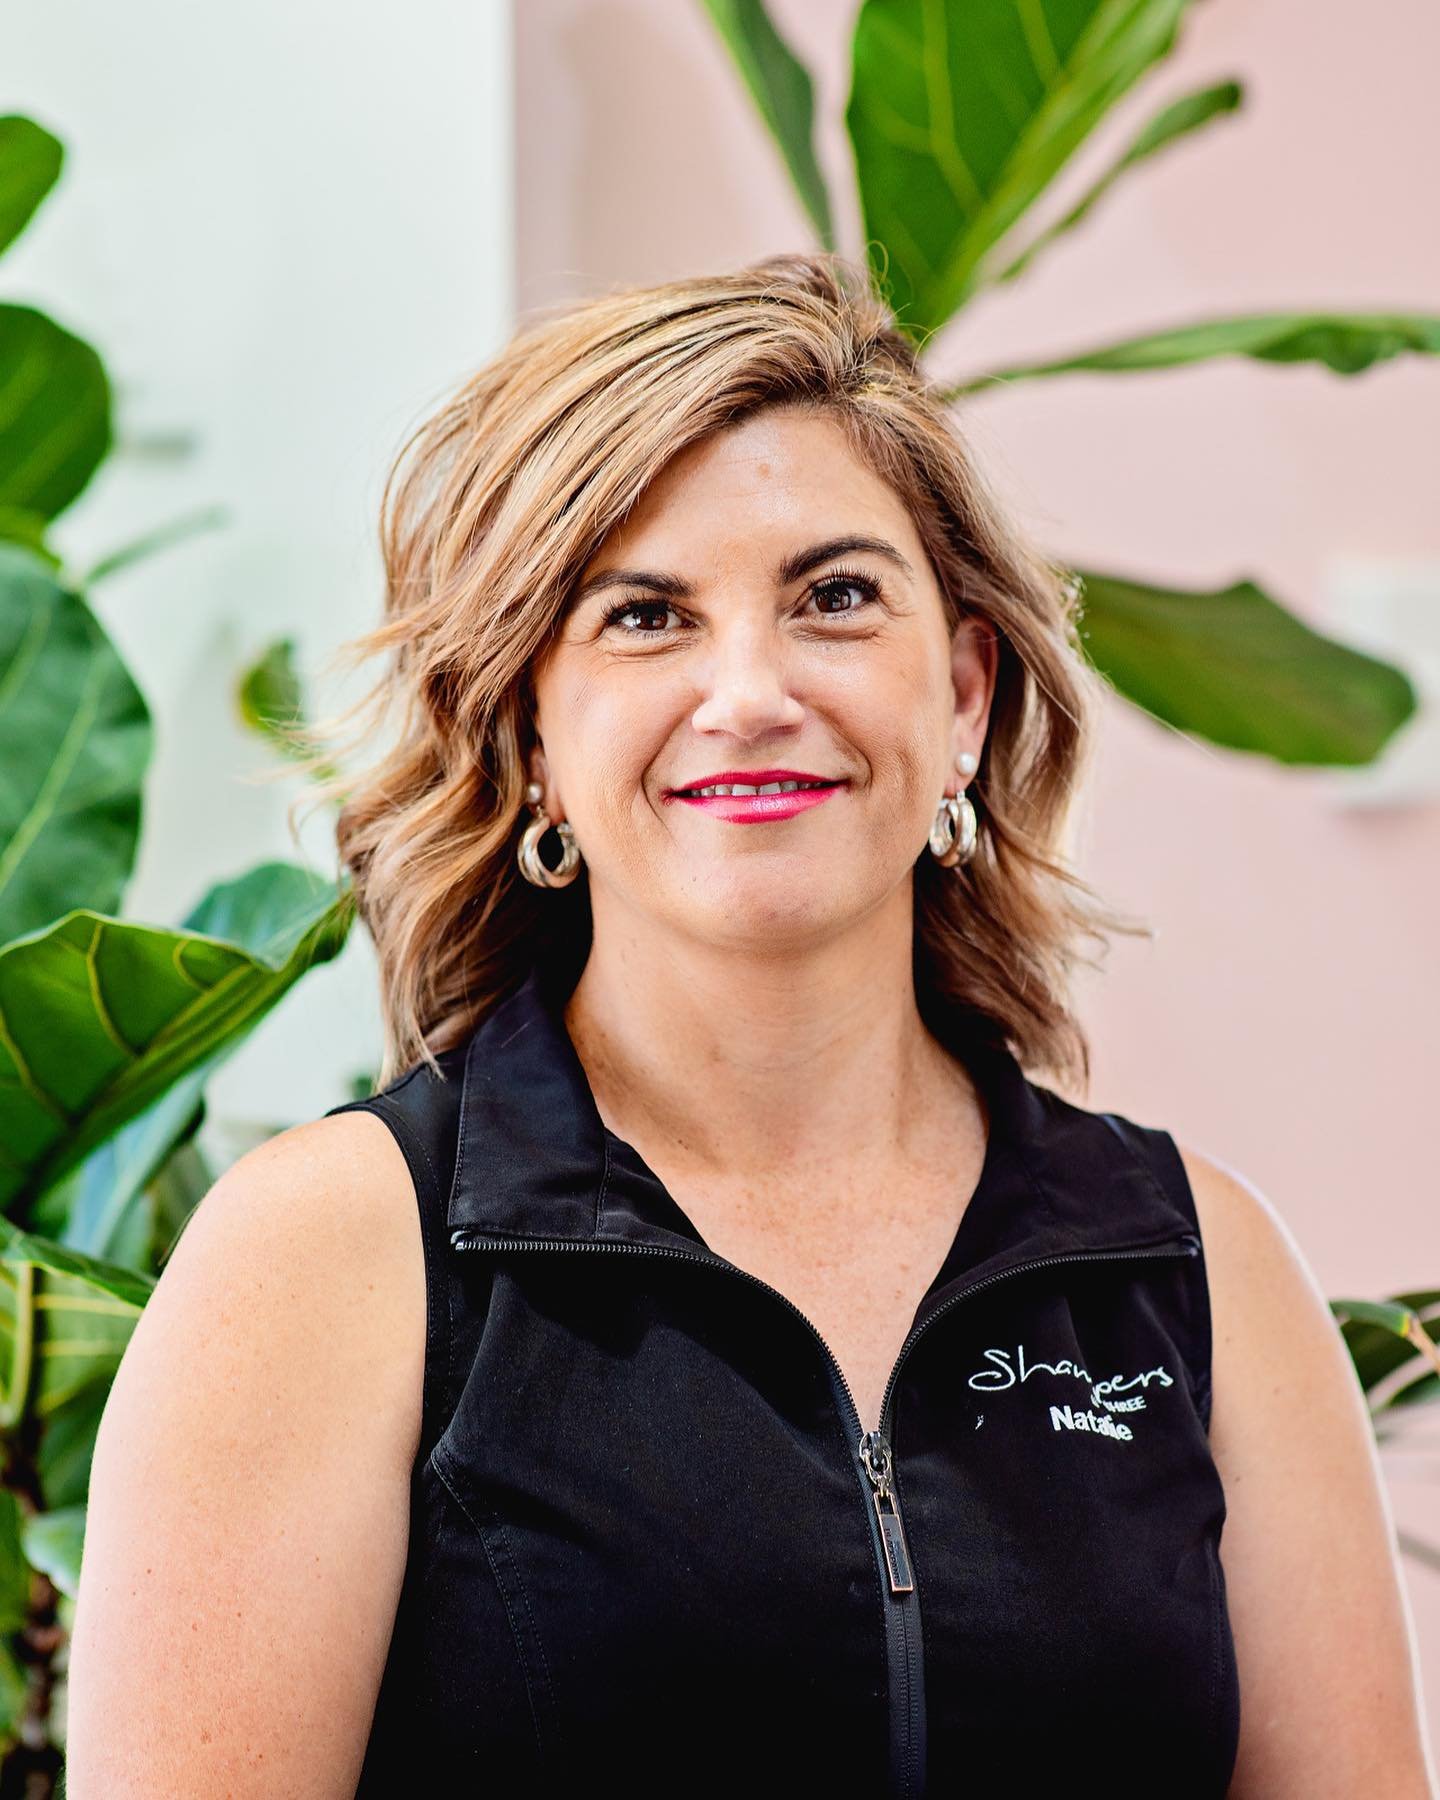 Meet &ldquo;boss lady&rdquo; and master stylist ✨Natalie✨

⁃	Natalie has been in the hair dressing industry for 28 years and has owned shampers at three for 18 of those 

⁃	When Nat&rsquo;s not working her magic she loves to enjoy a relaxing massage,